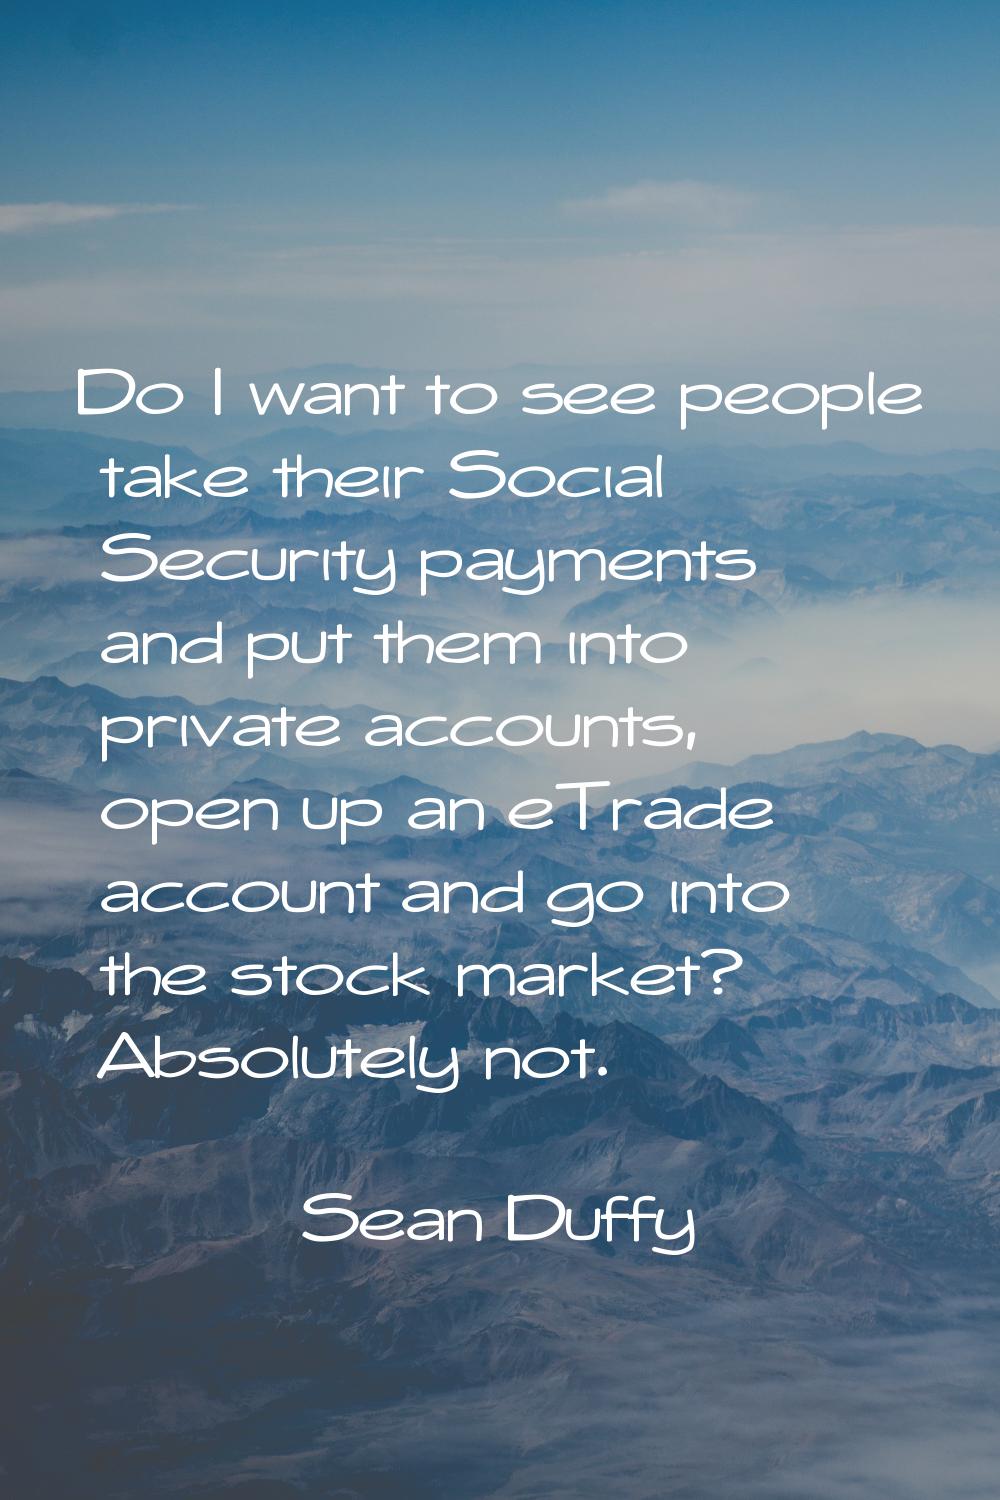 Do I want to see people take their Social Security payments and put them into private accounts, ope